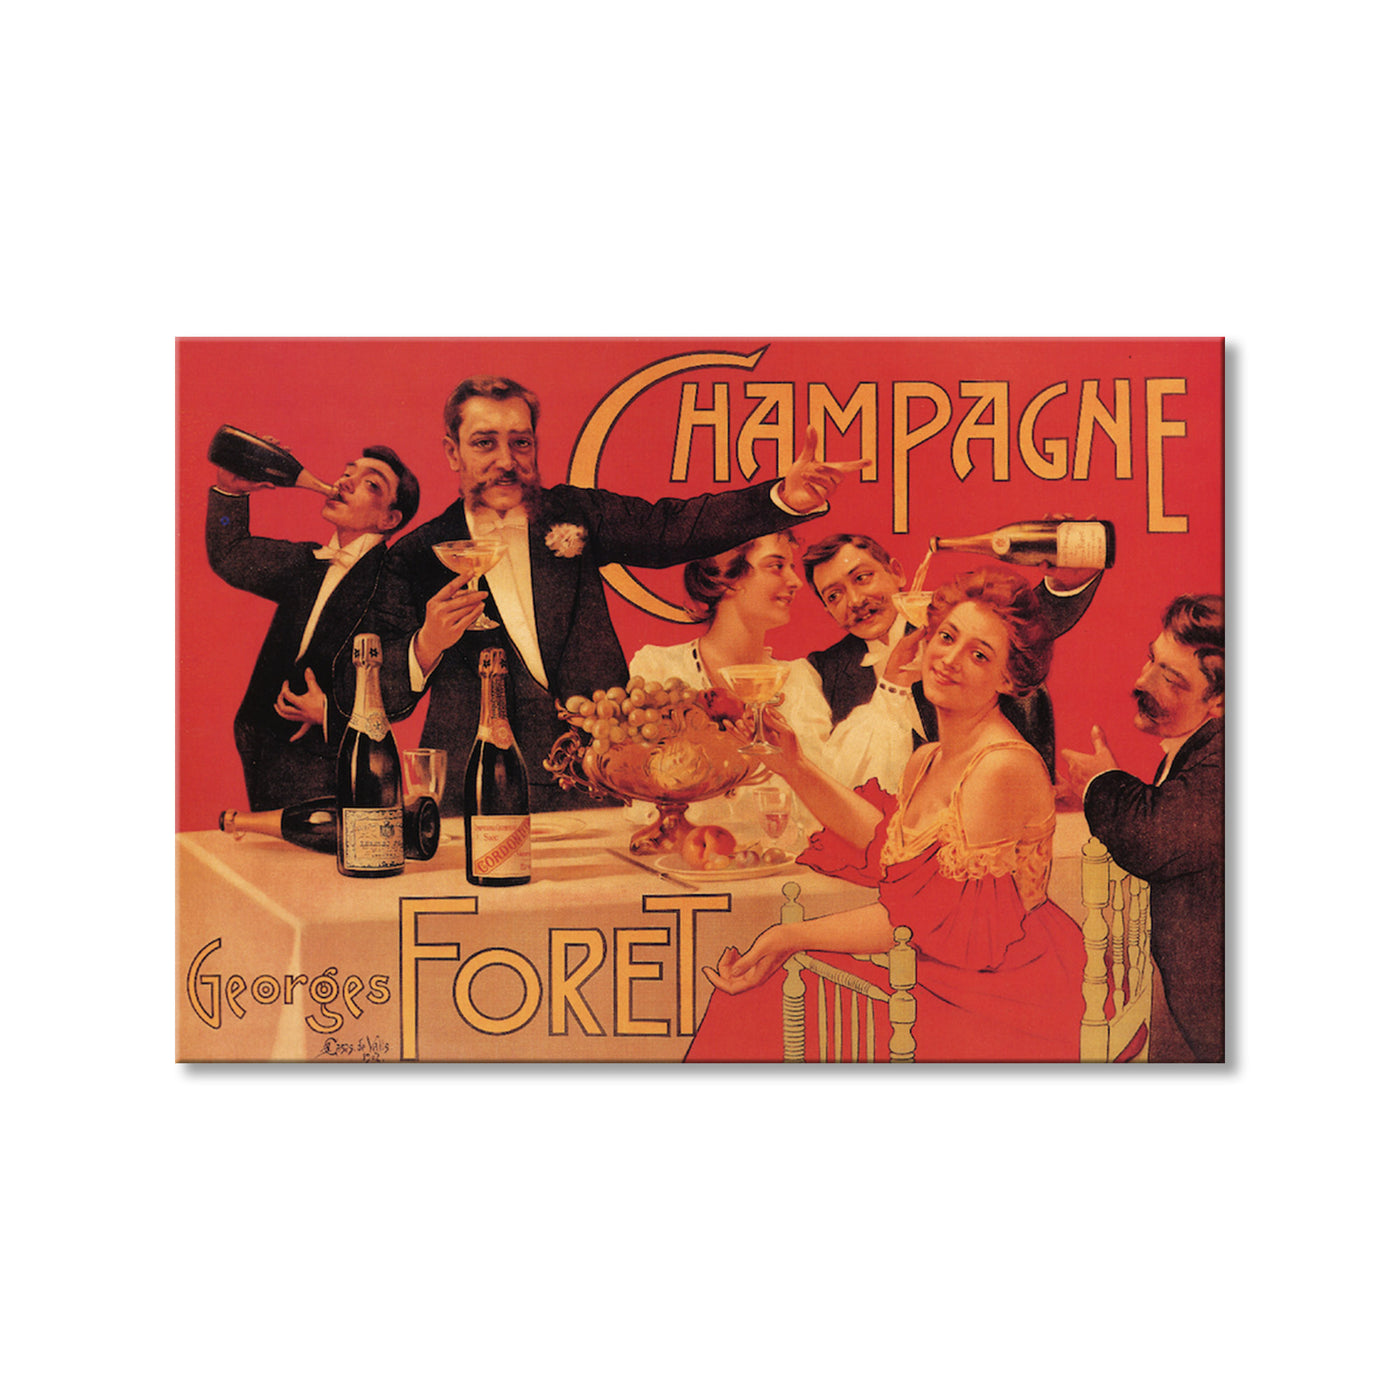 Champagne Georges Foret